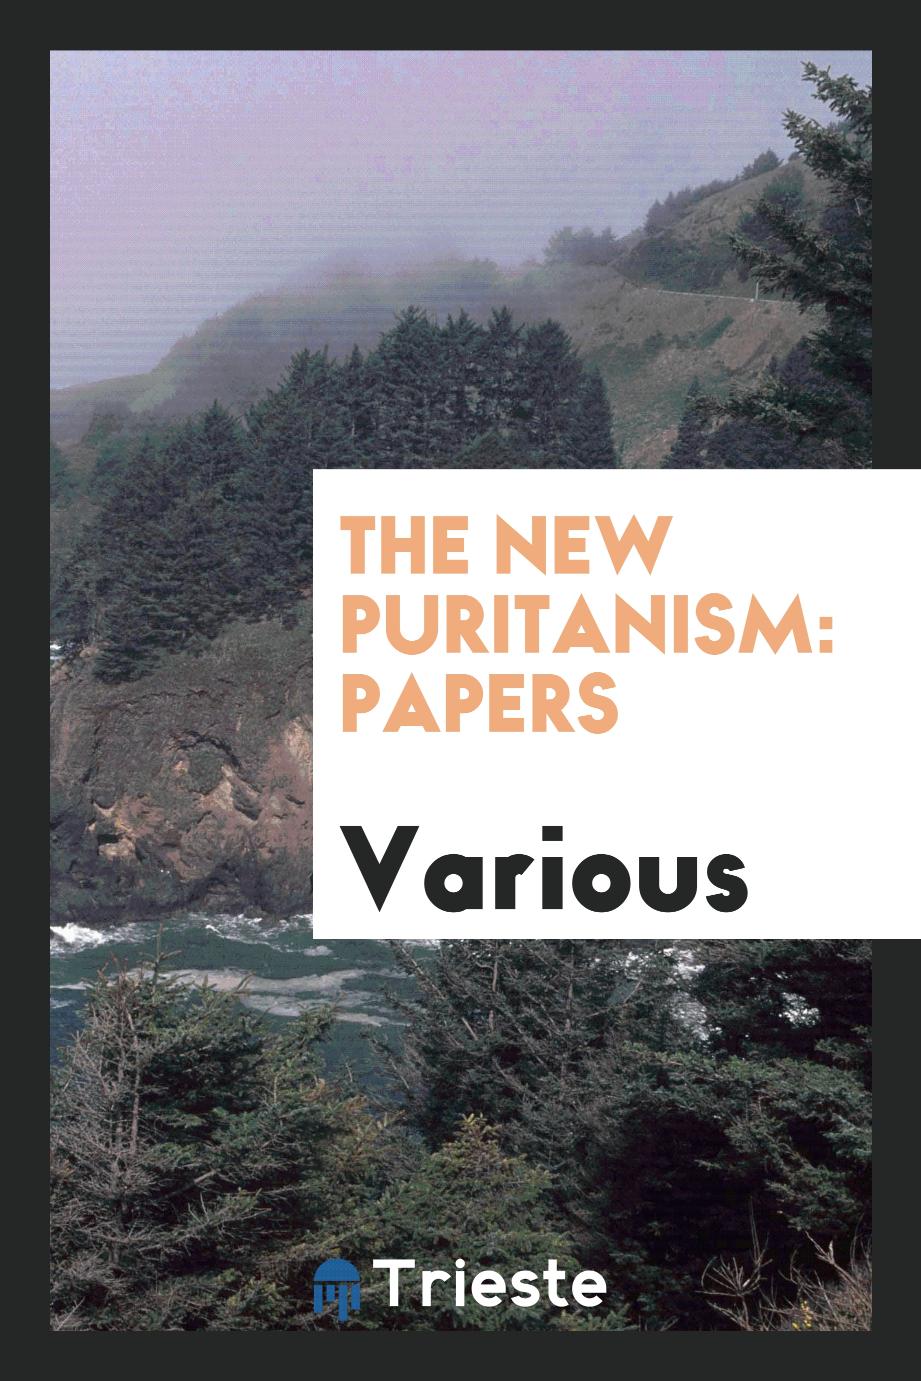 The new Puritanism: papers